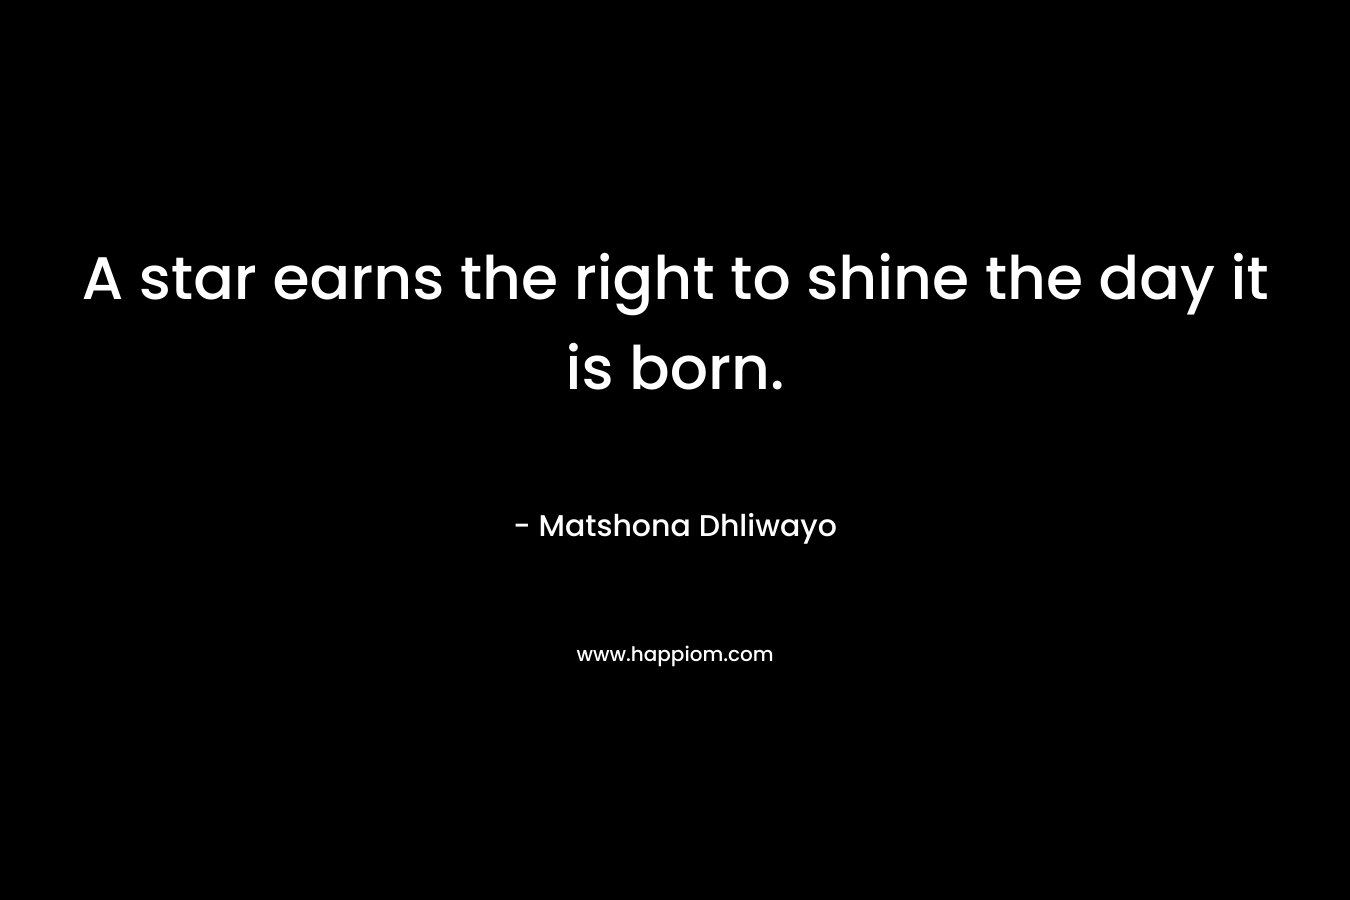 A star earns the right to shine the day it is born. – Matshona Dhliwayo